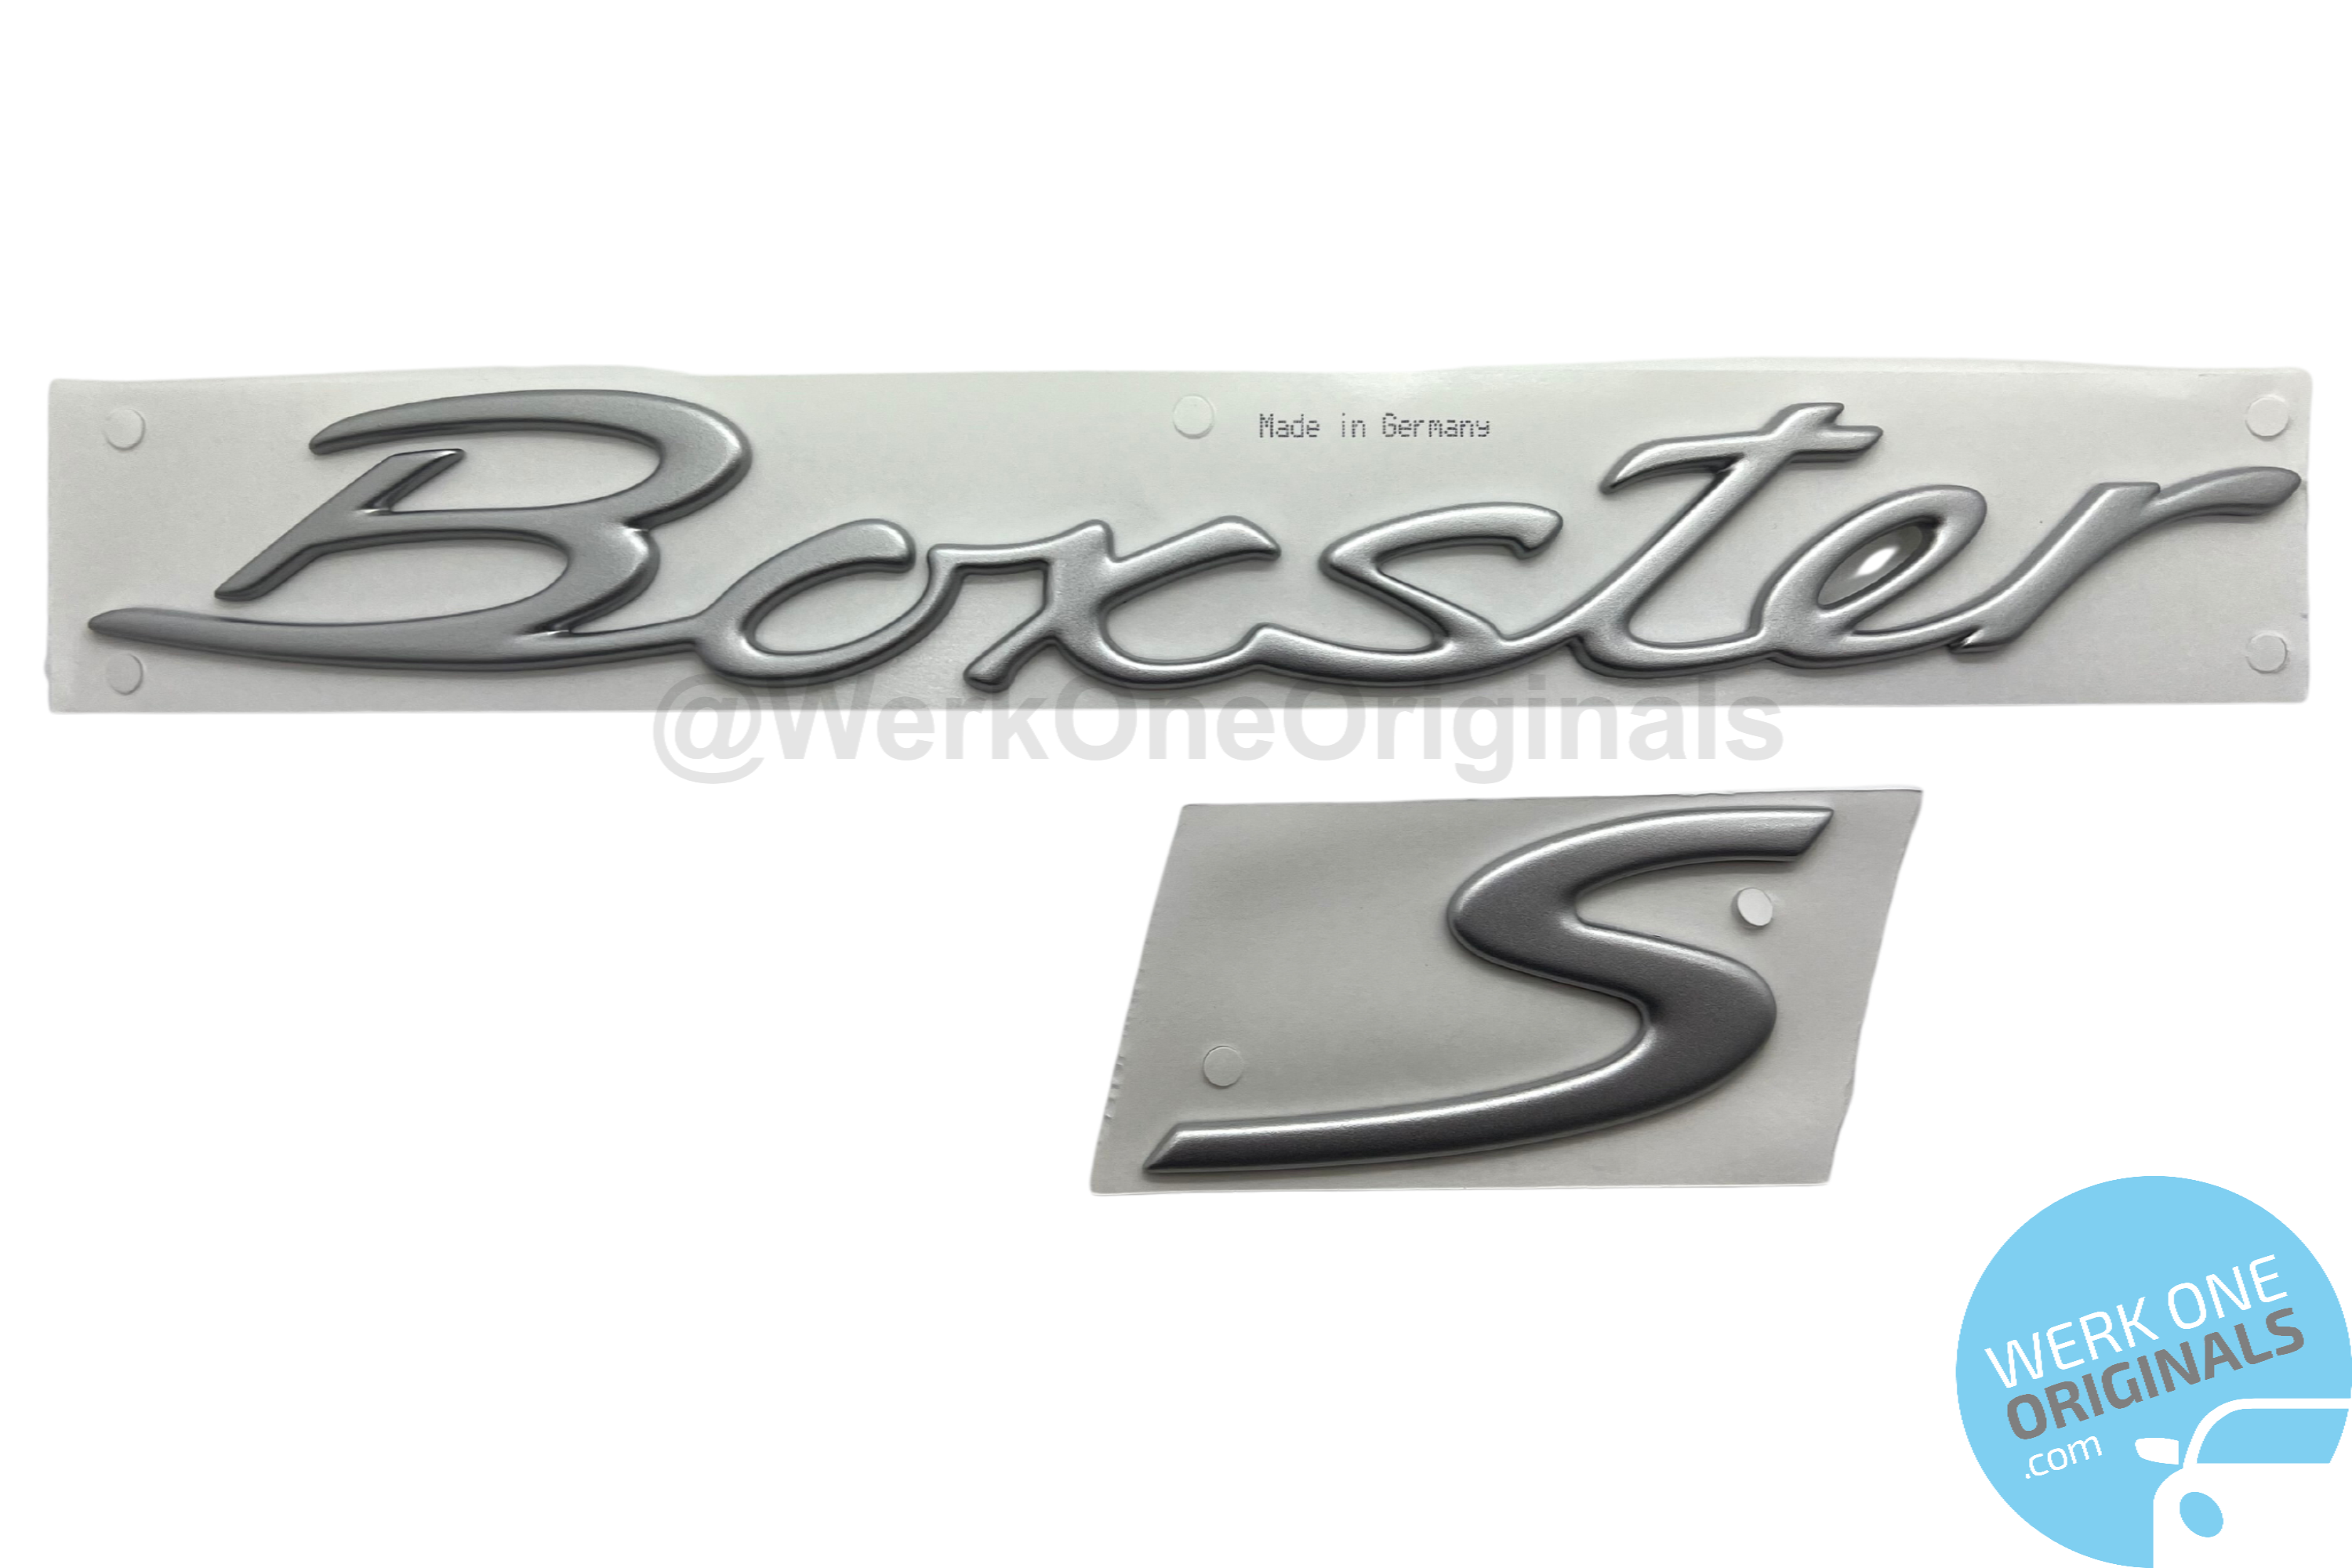 Porsche Official 'Boxster S' Rear Badge Decal in Matte Silver for Boxster S Type 987 Models